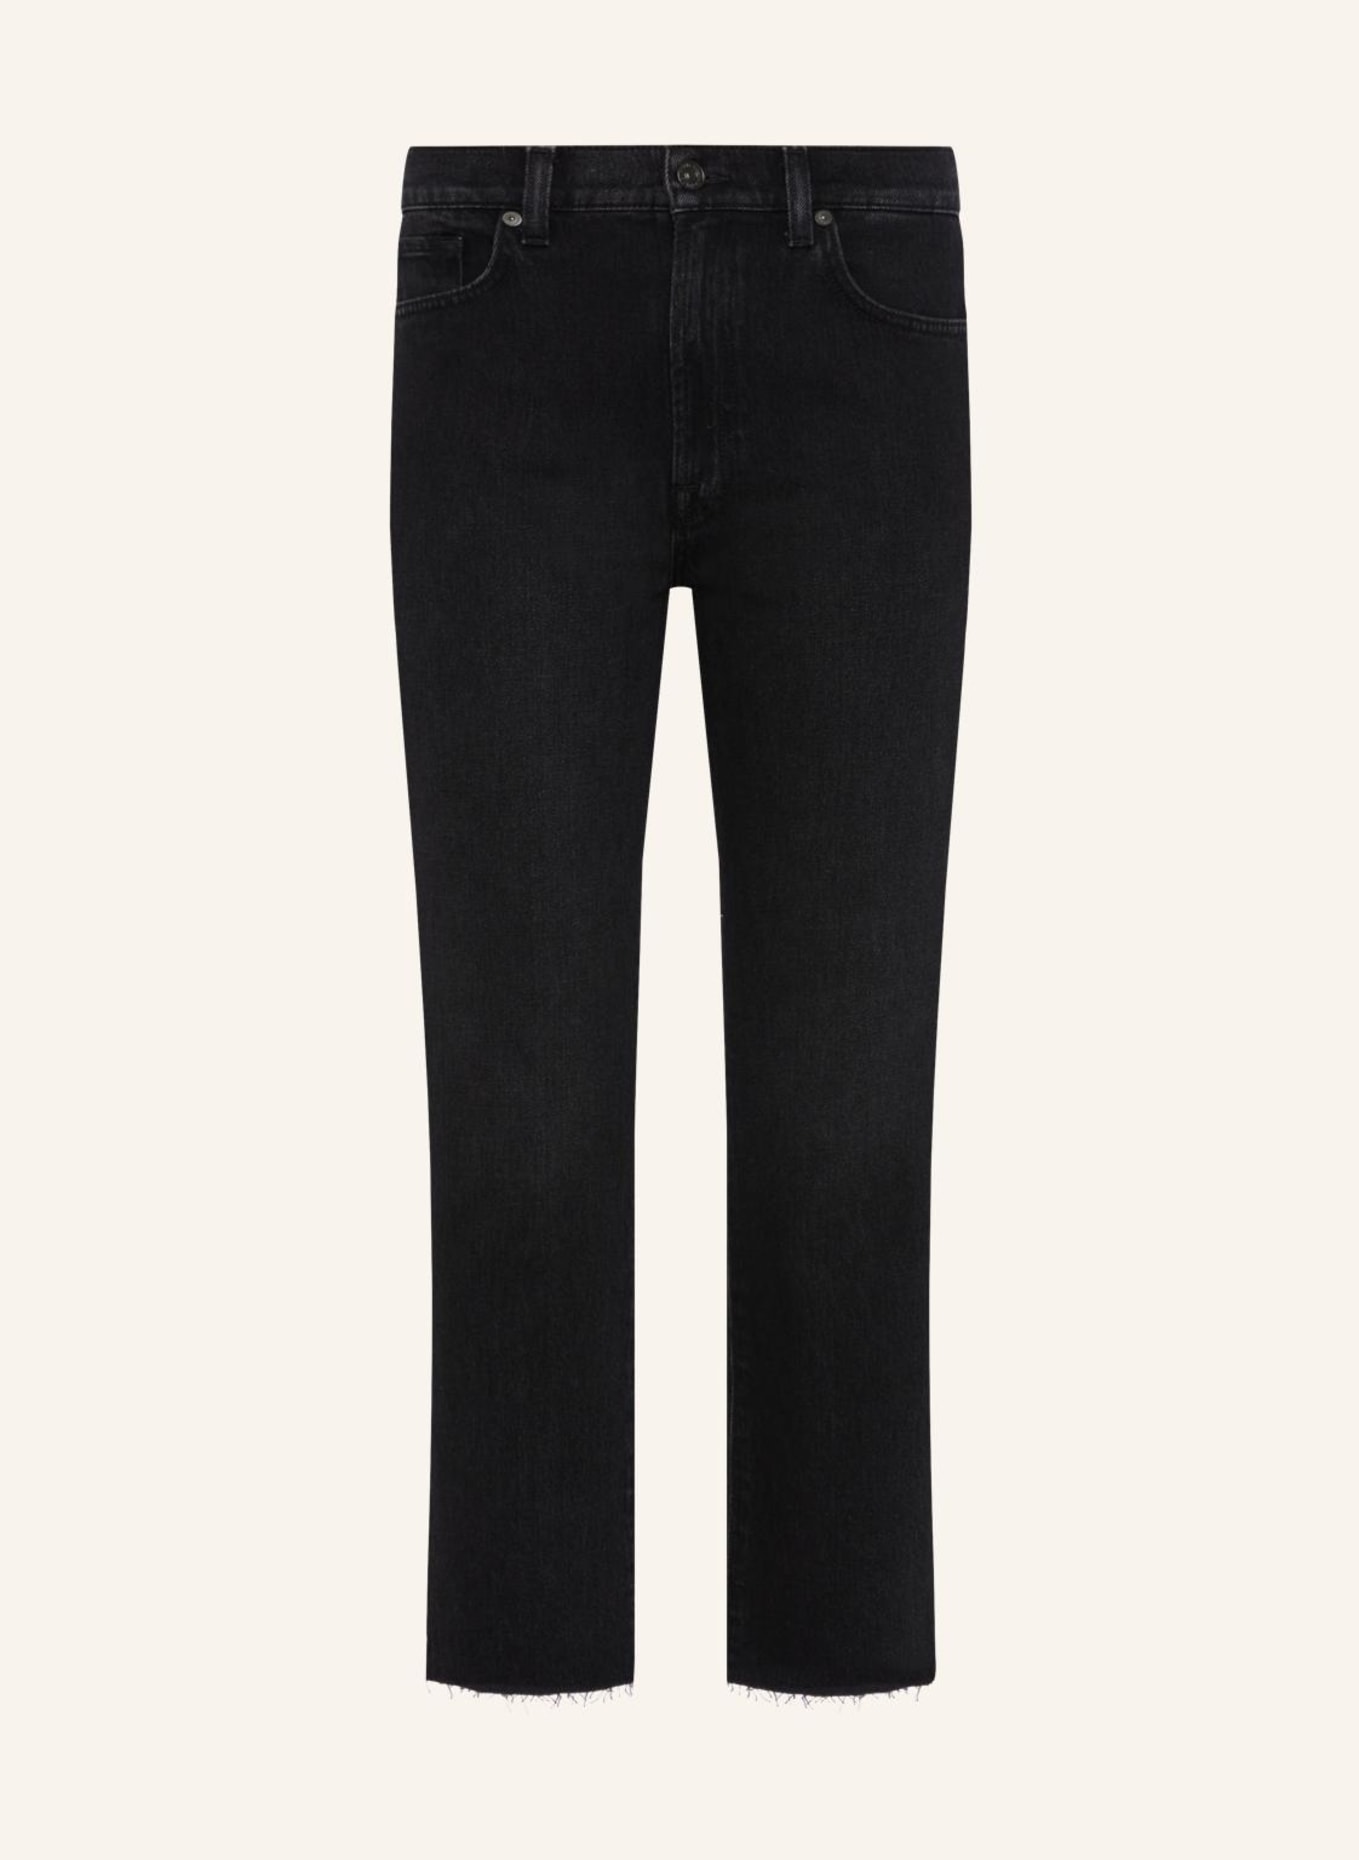 7 for all mankind Jeans LOGAN STOVEPIPE Straight fit, Farbe: SCHWARZ (Bild 1)